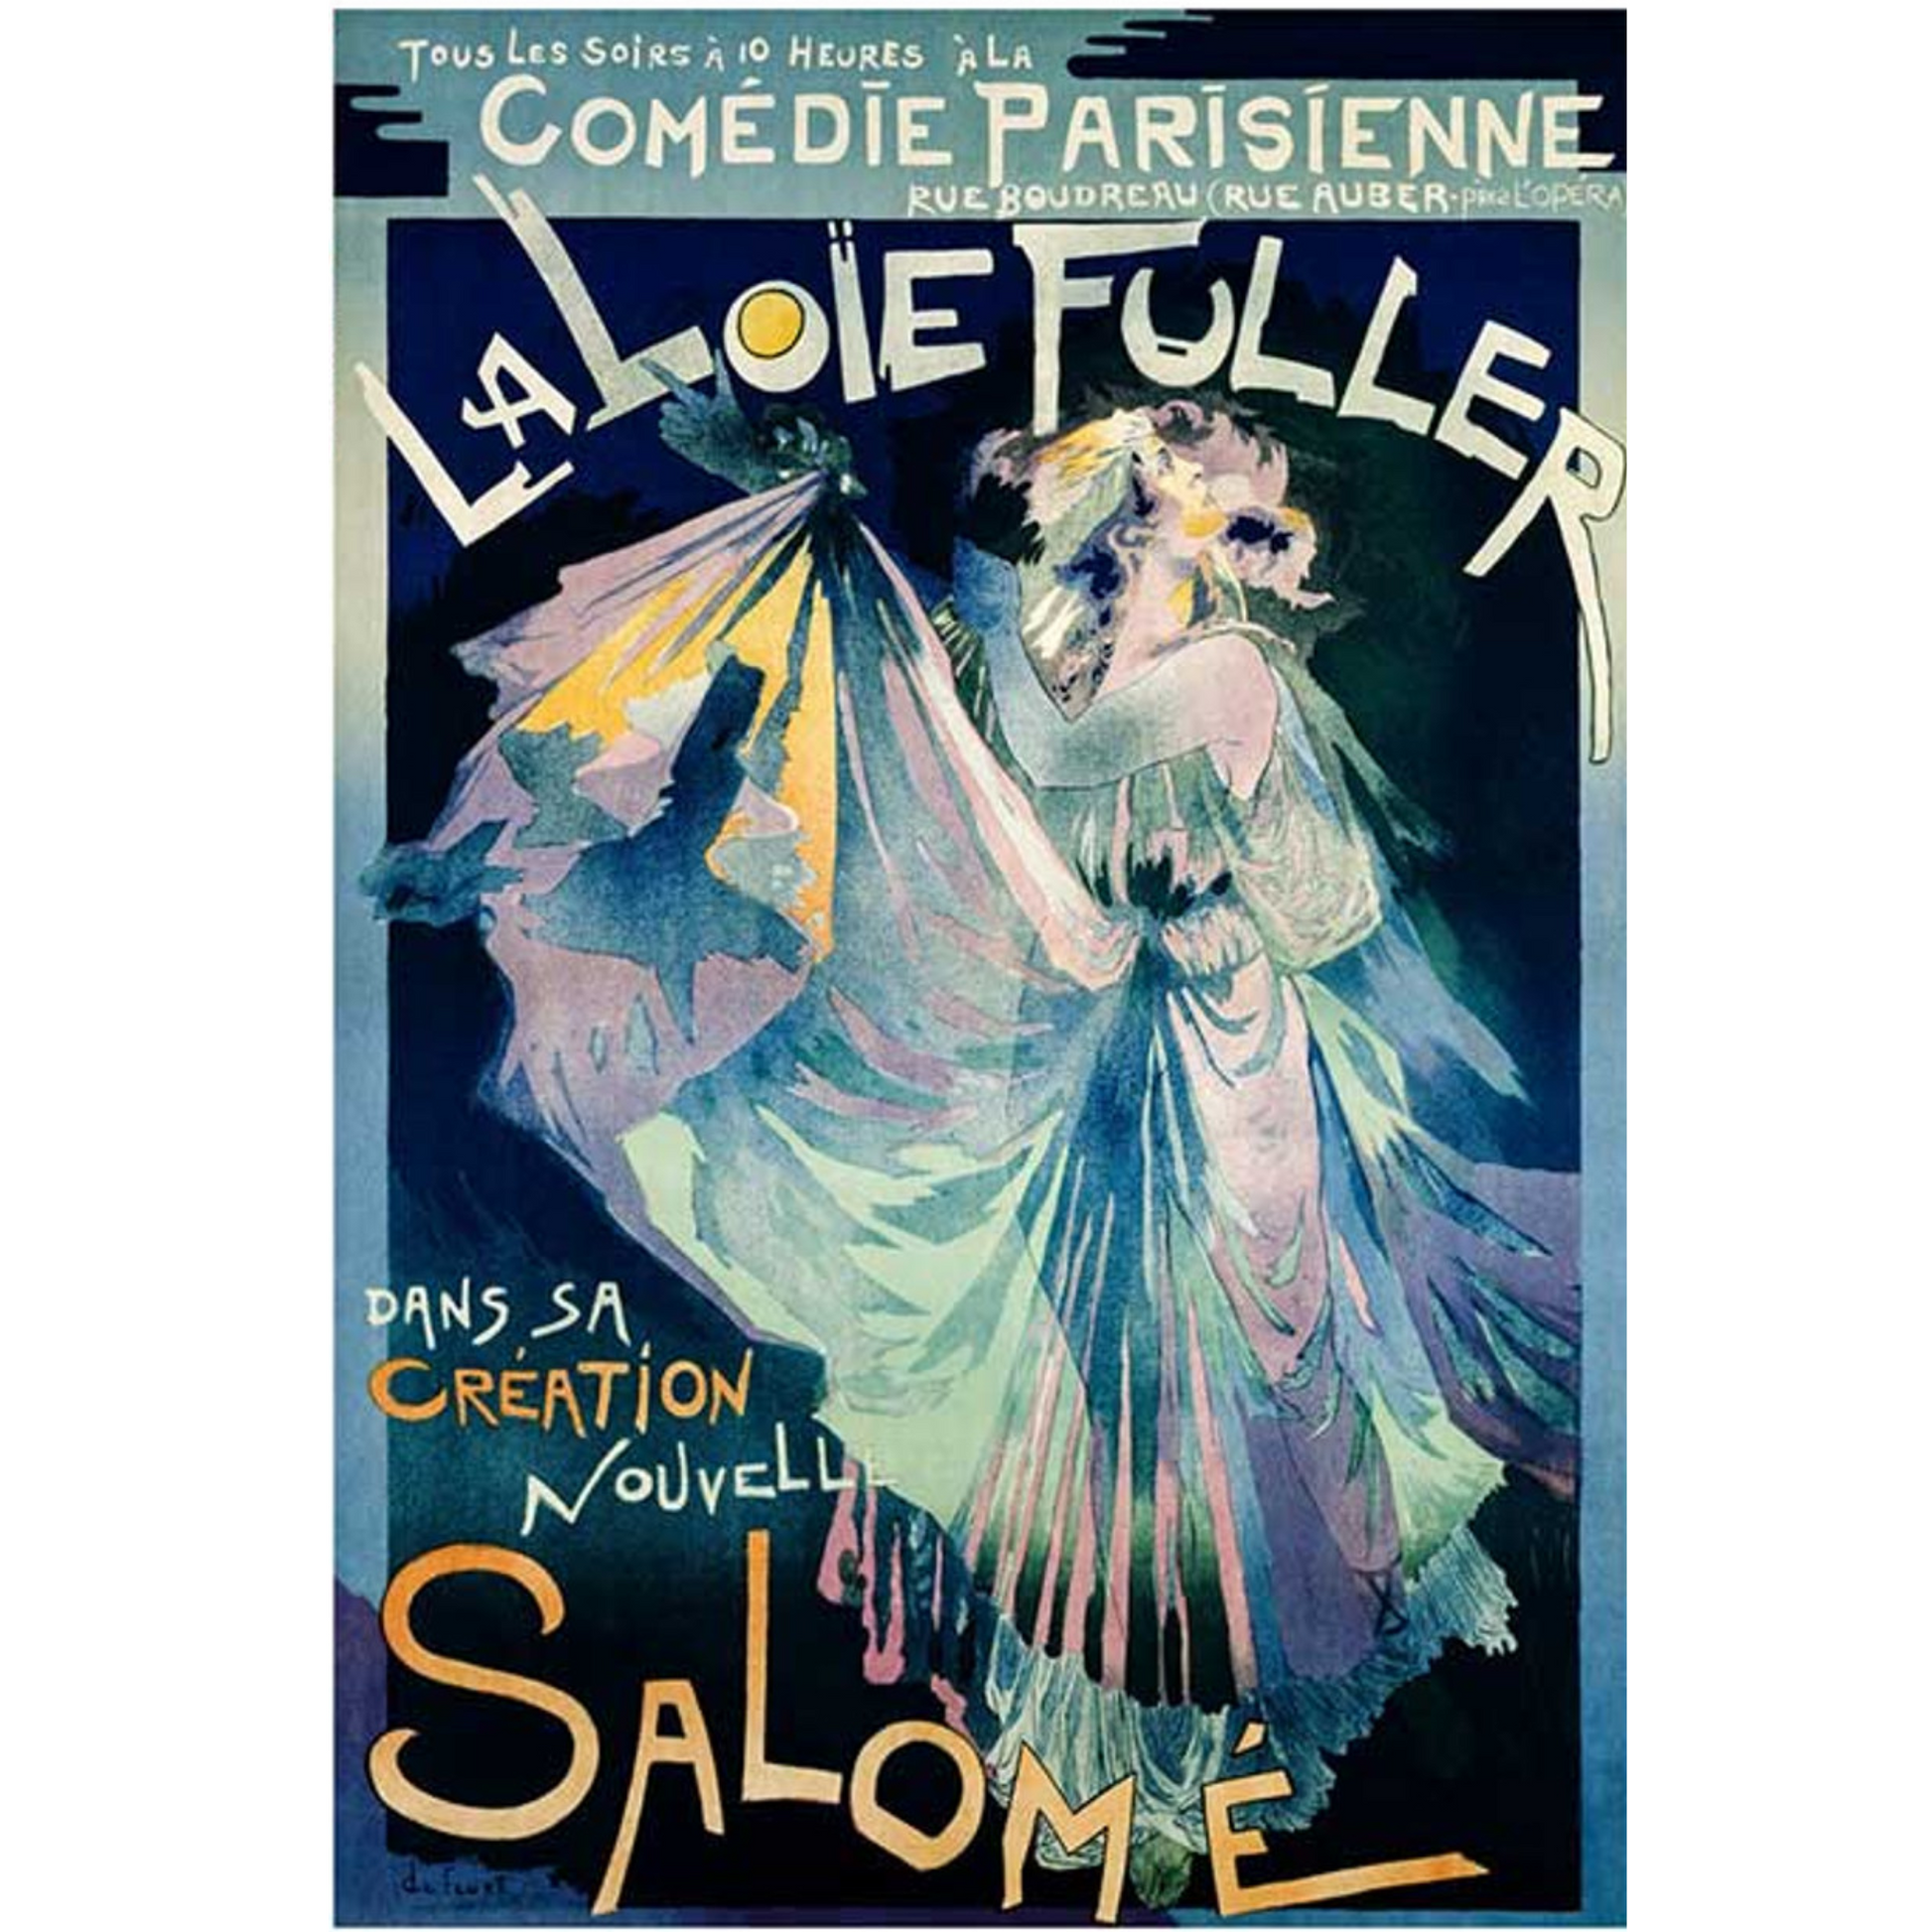 "La Loie Fuller as Salome" decoupage rice paper by Paper Designs. Size A4 available at Milton's Daughter.